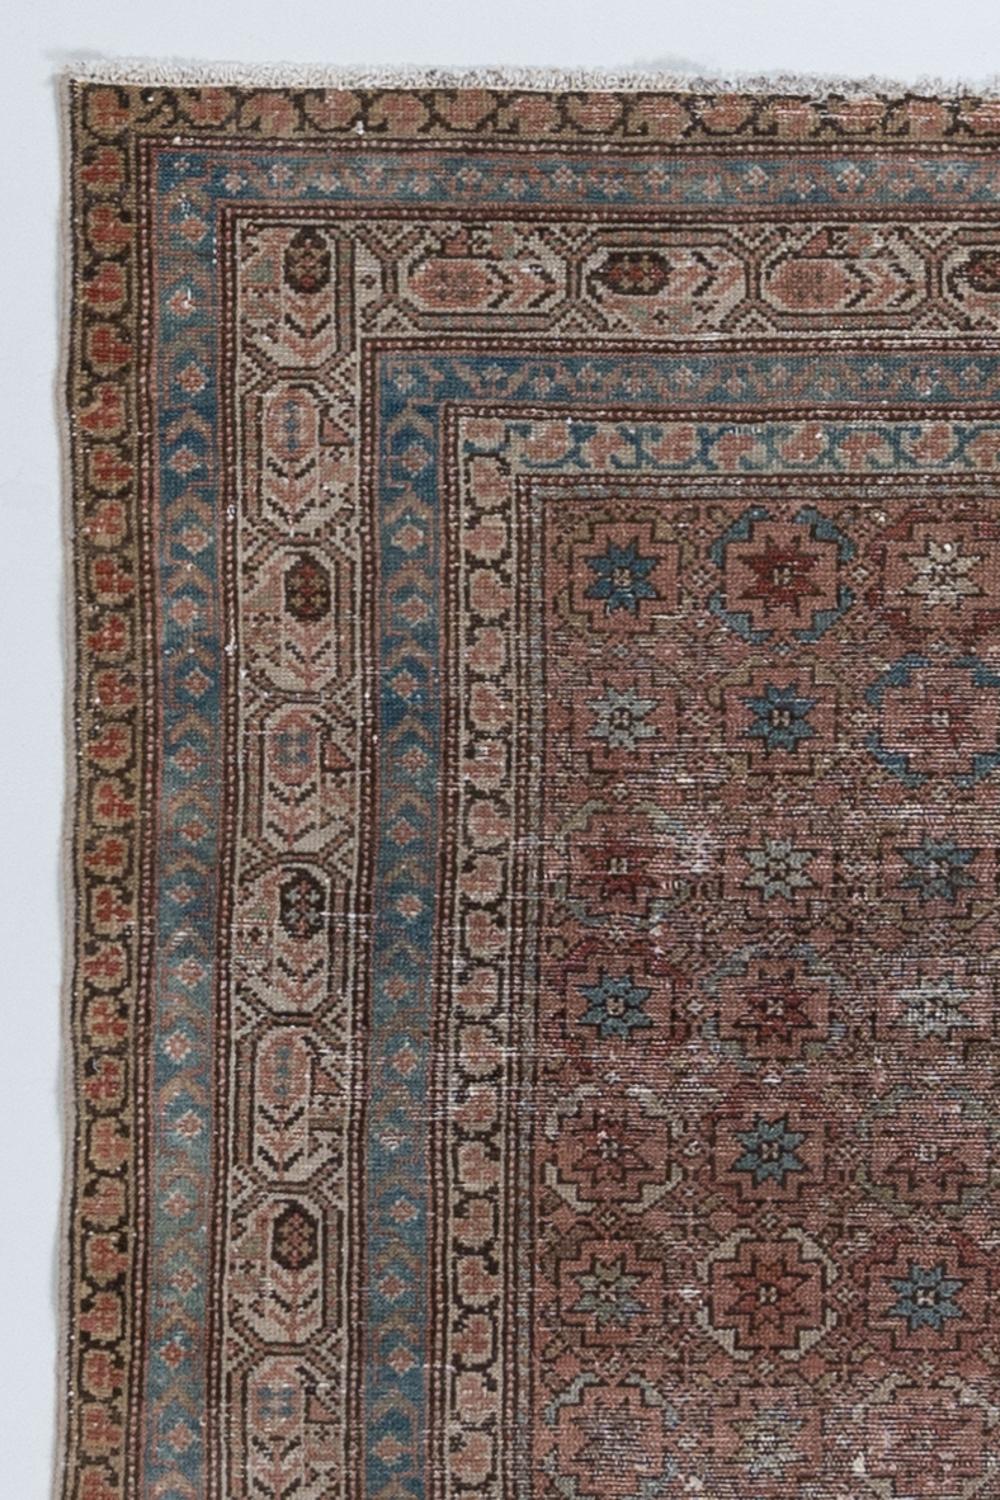 Hand-Woven Antique Malayer Rug